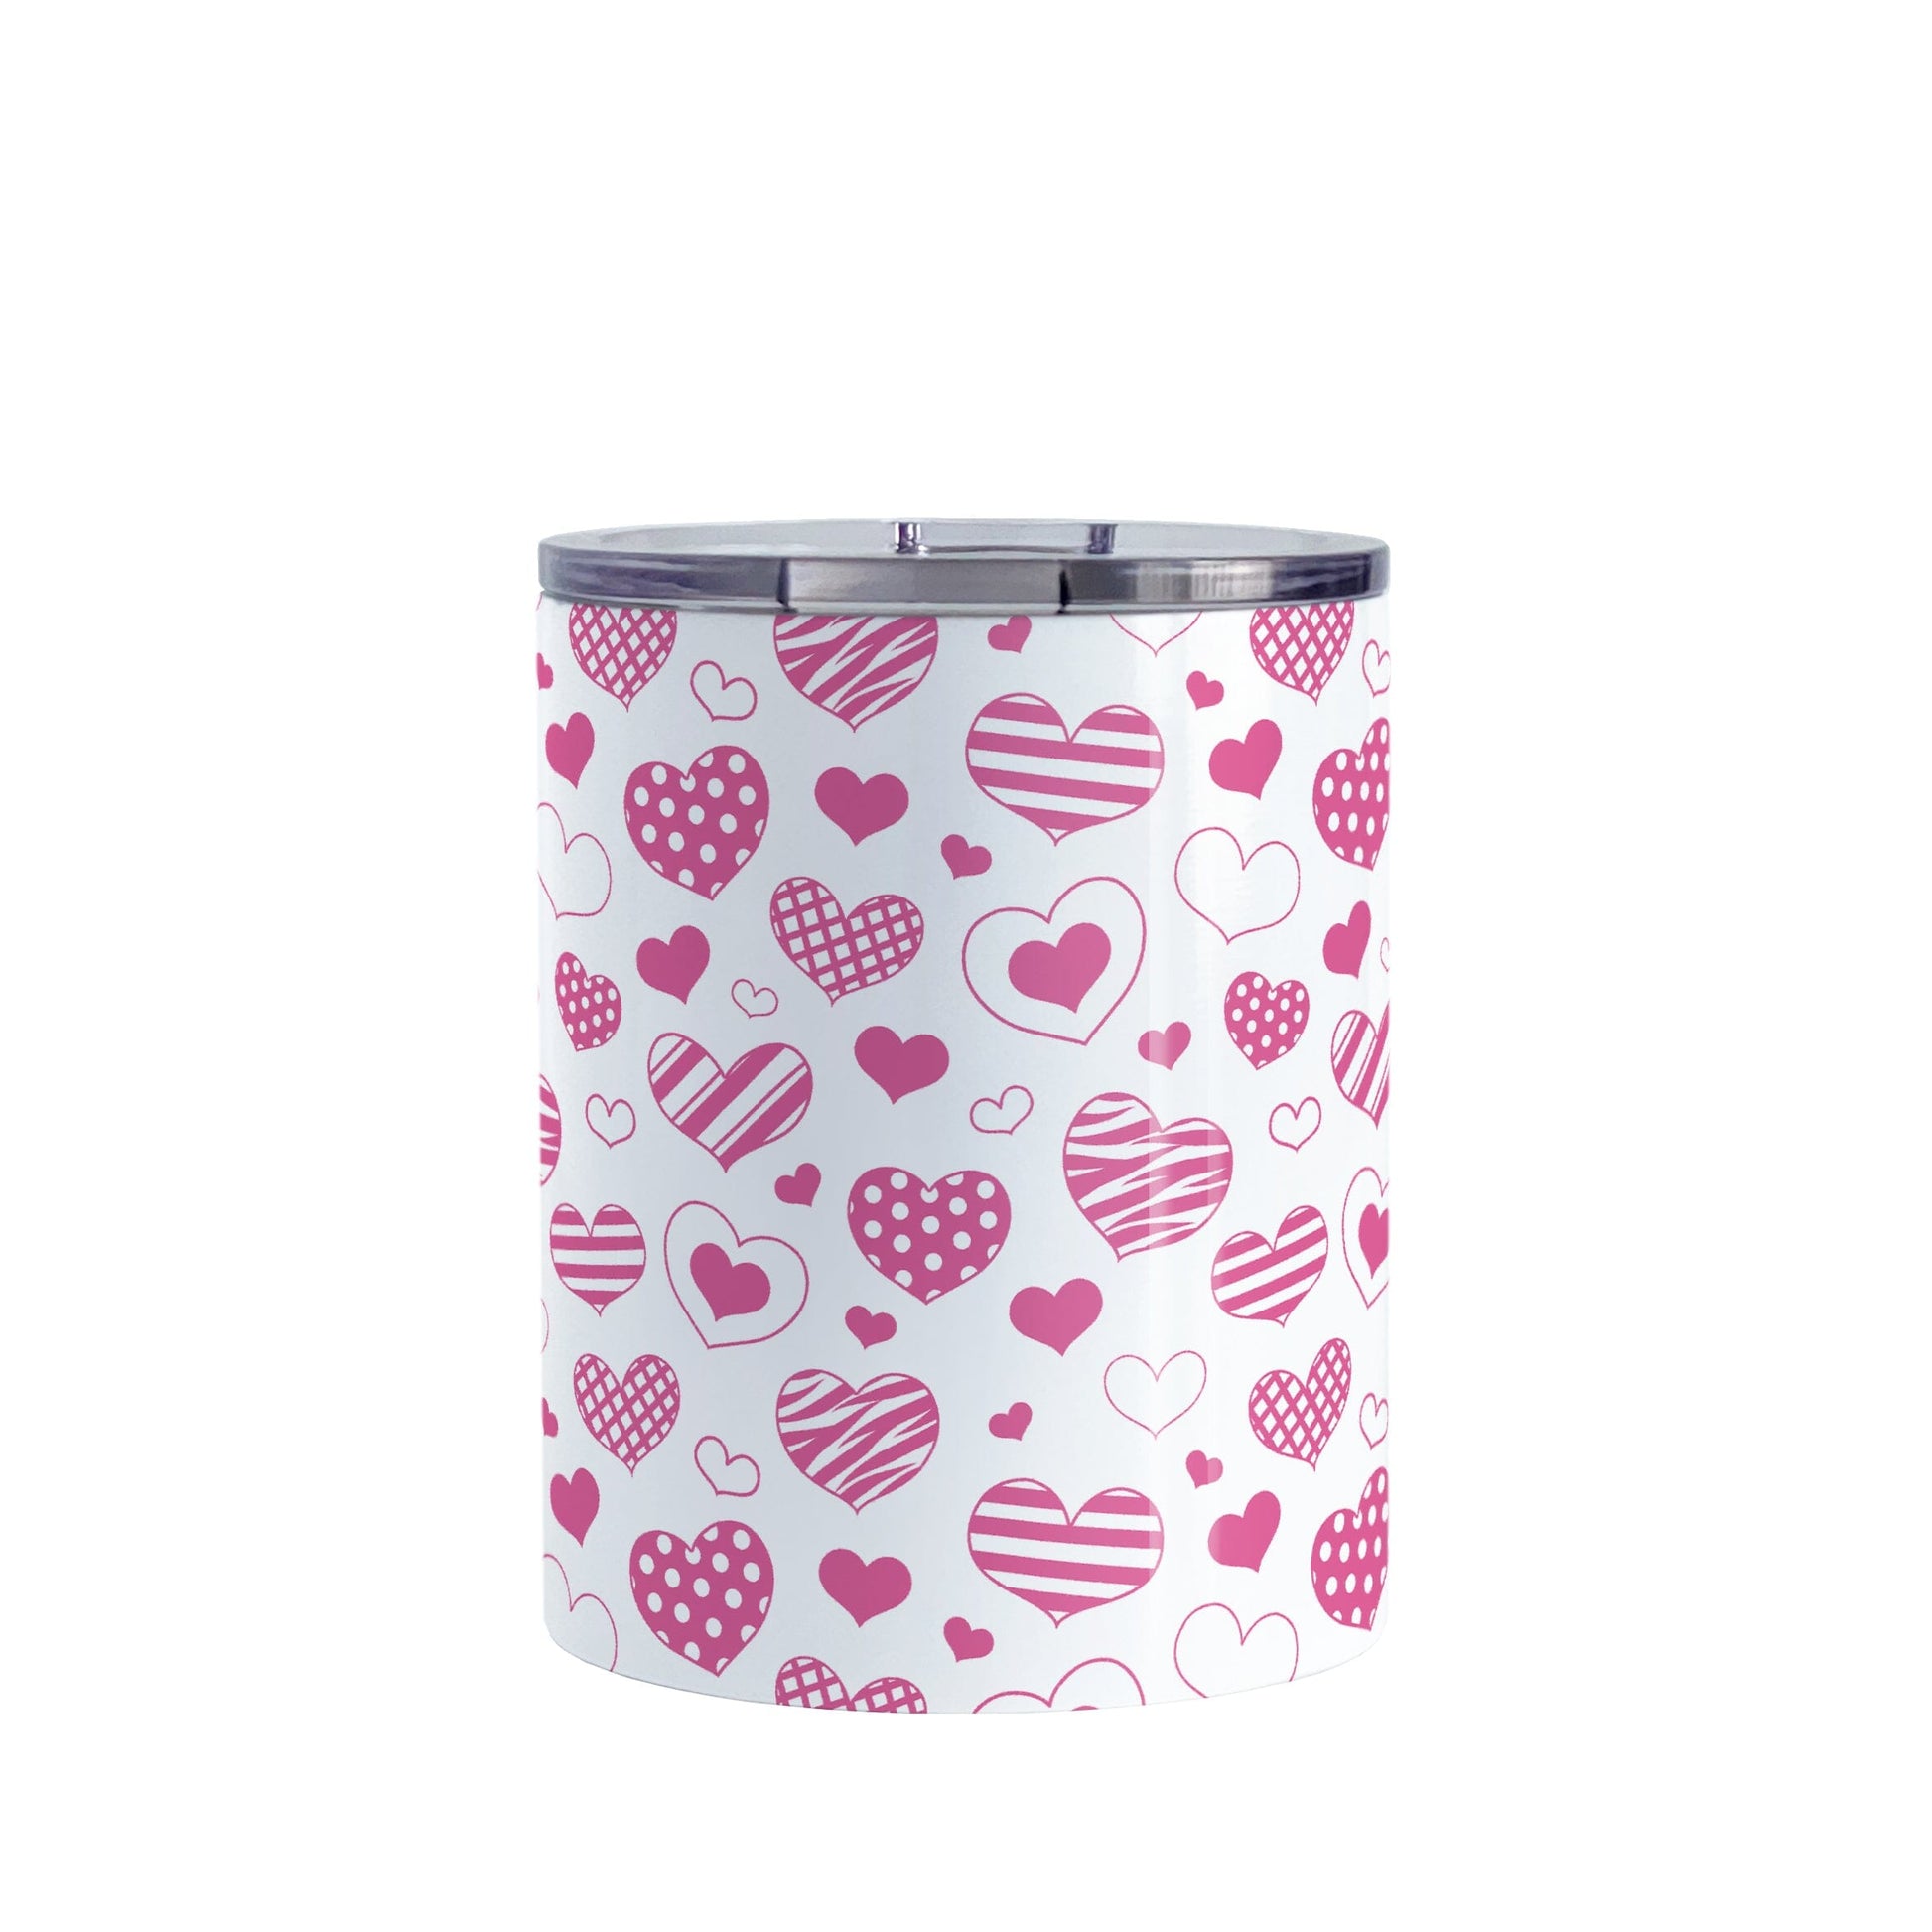 Pink Heart Doodles Tumbler Cup (10oz) at Amy's Coffee Mugs. A stainless steel tumbler cup designed with hand-drawn pink heart doodles in a pattern that wraps around the cup. This cute heart pattern is perfect for Valentine's Day or for anyone who loves hearts and young-at-heart drawings. 